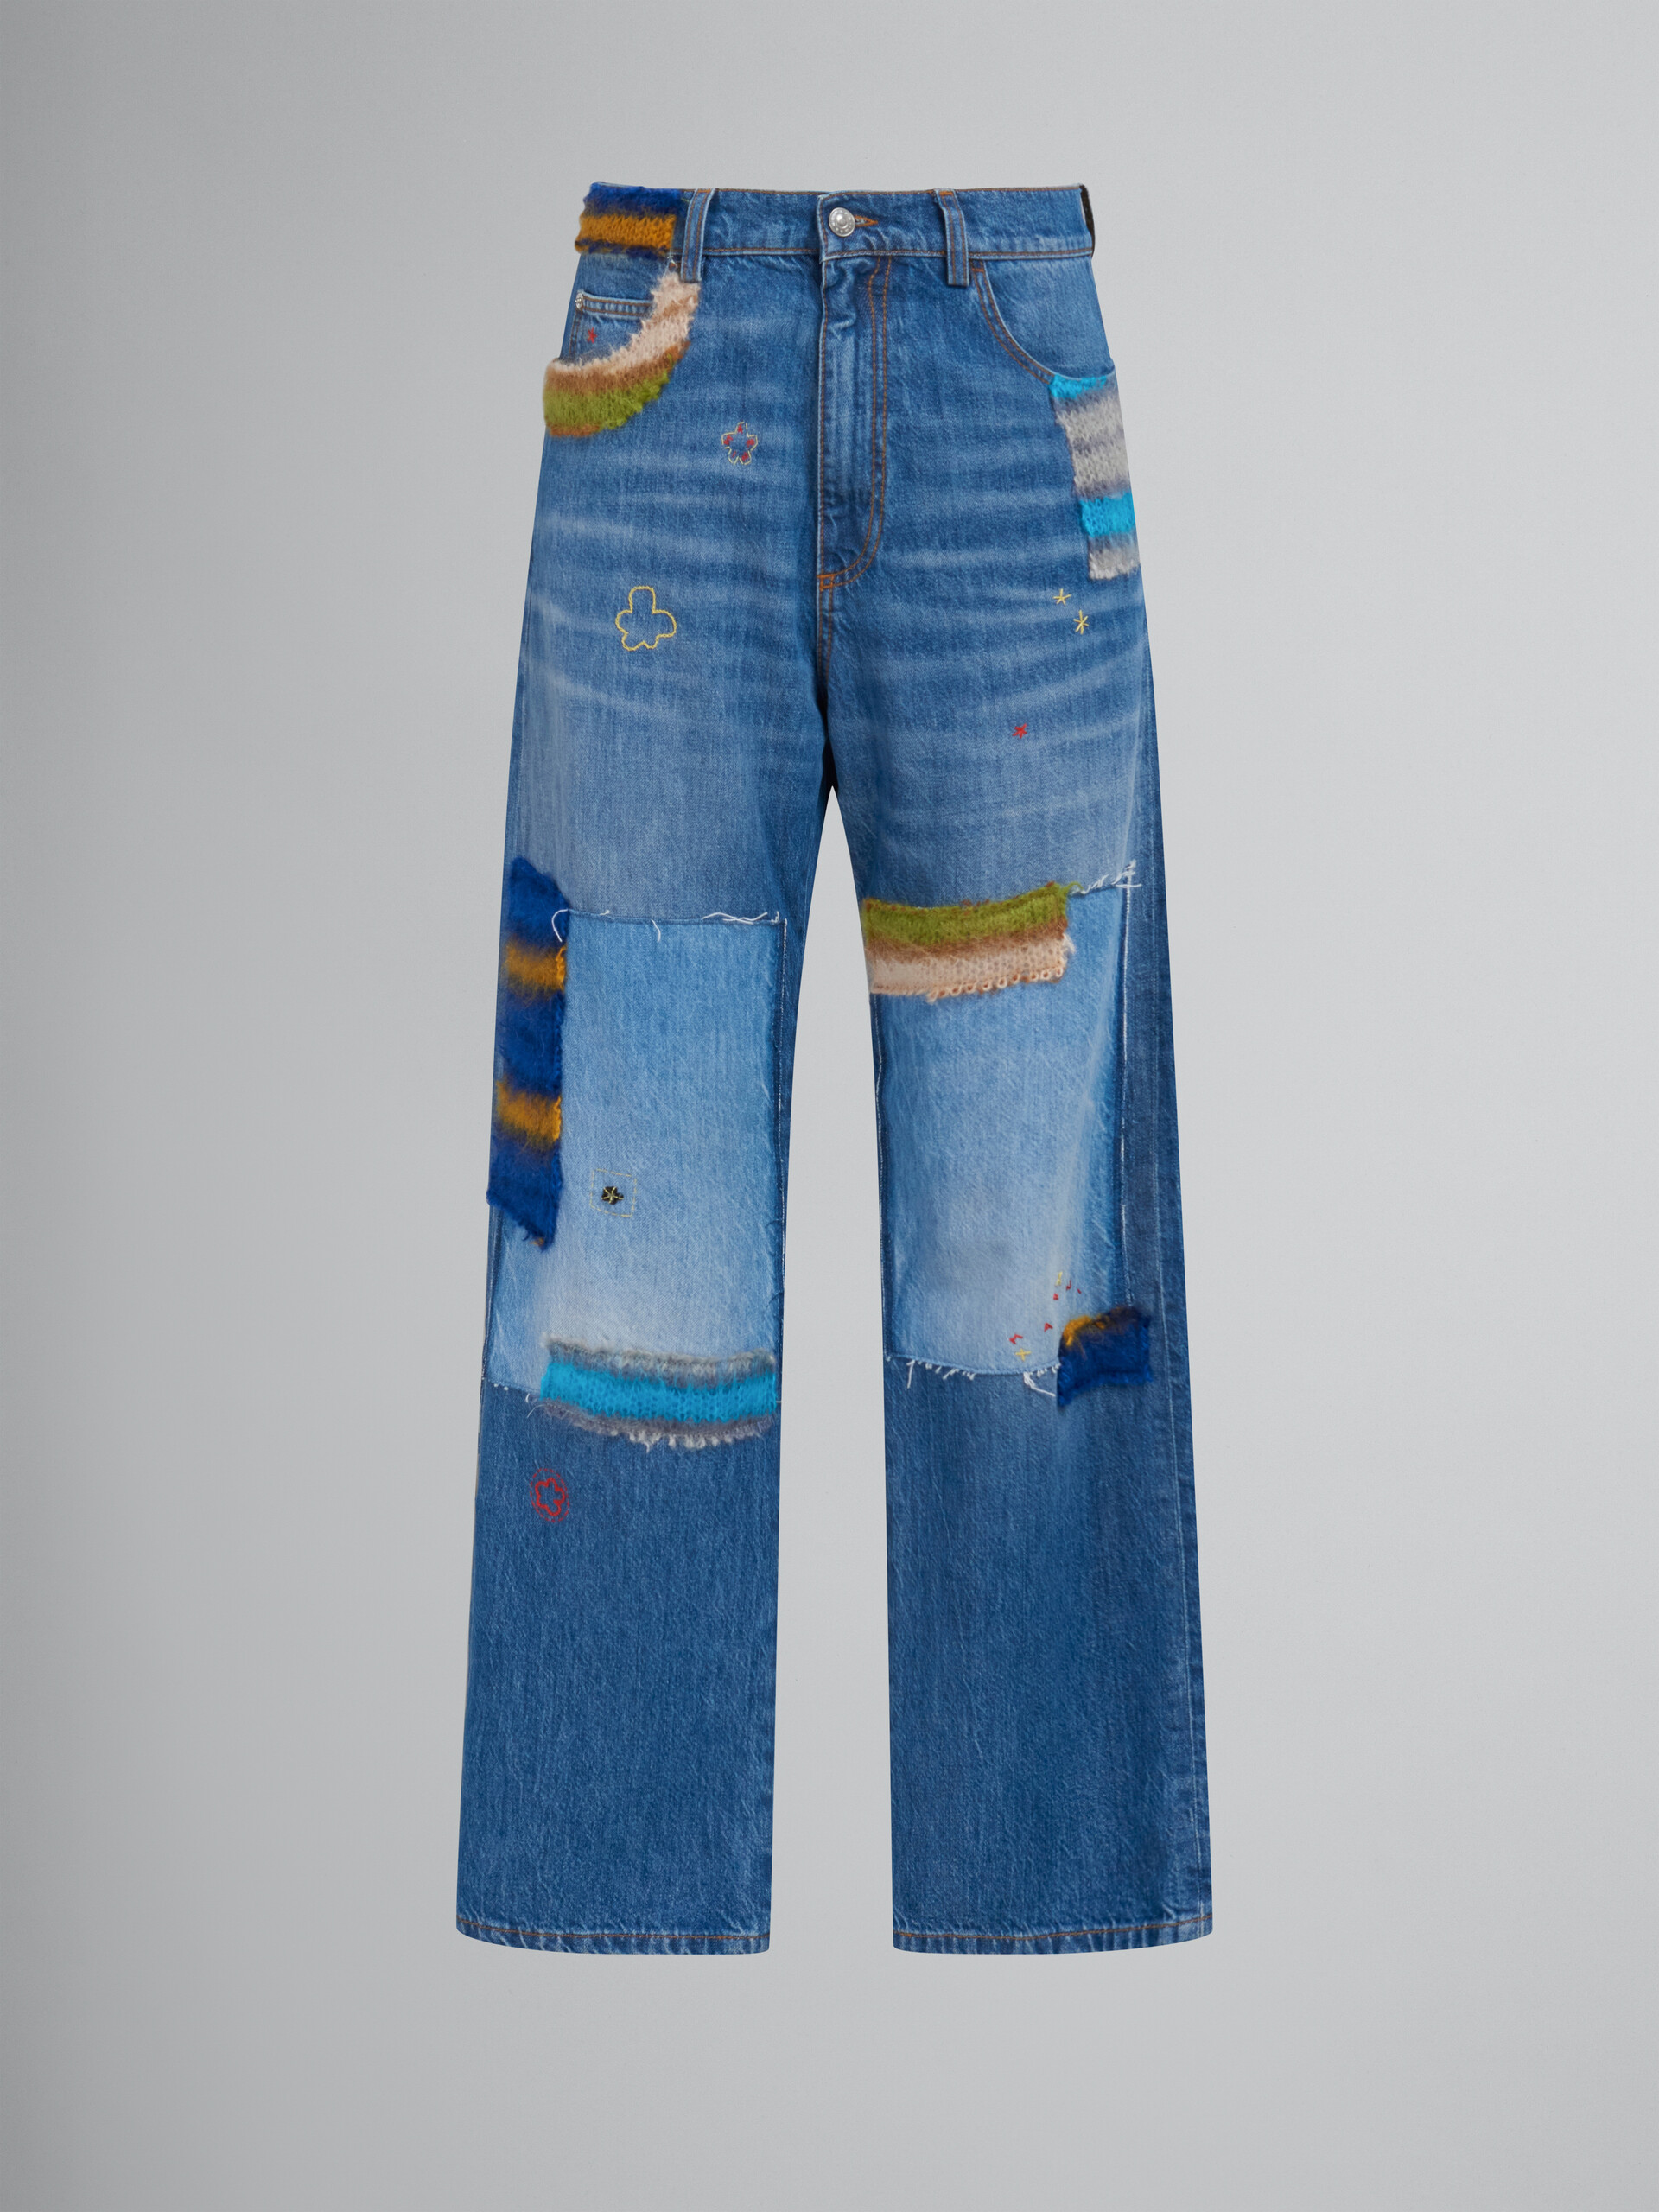 Blue organic denim jeans with mohair patches - Pants - Image 1